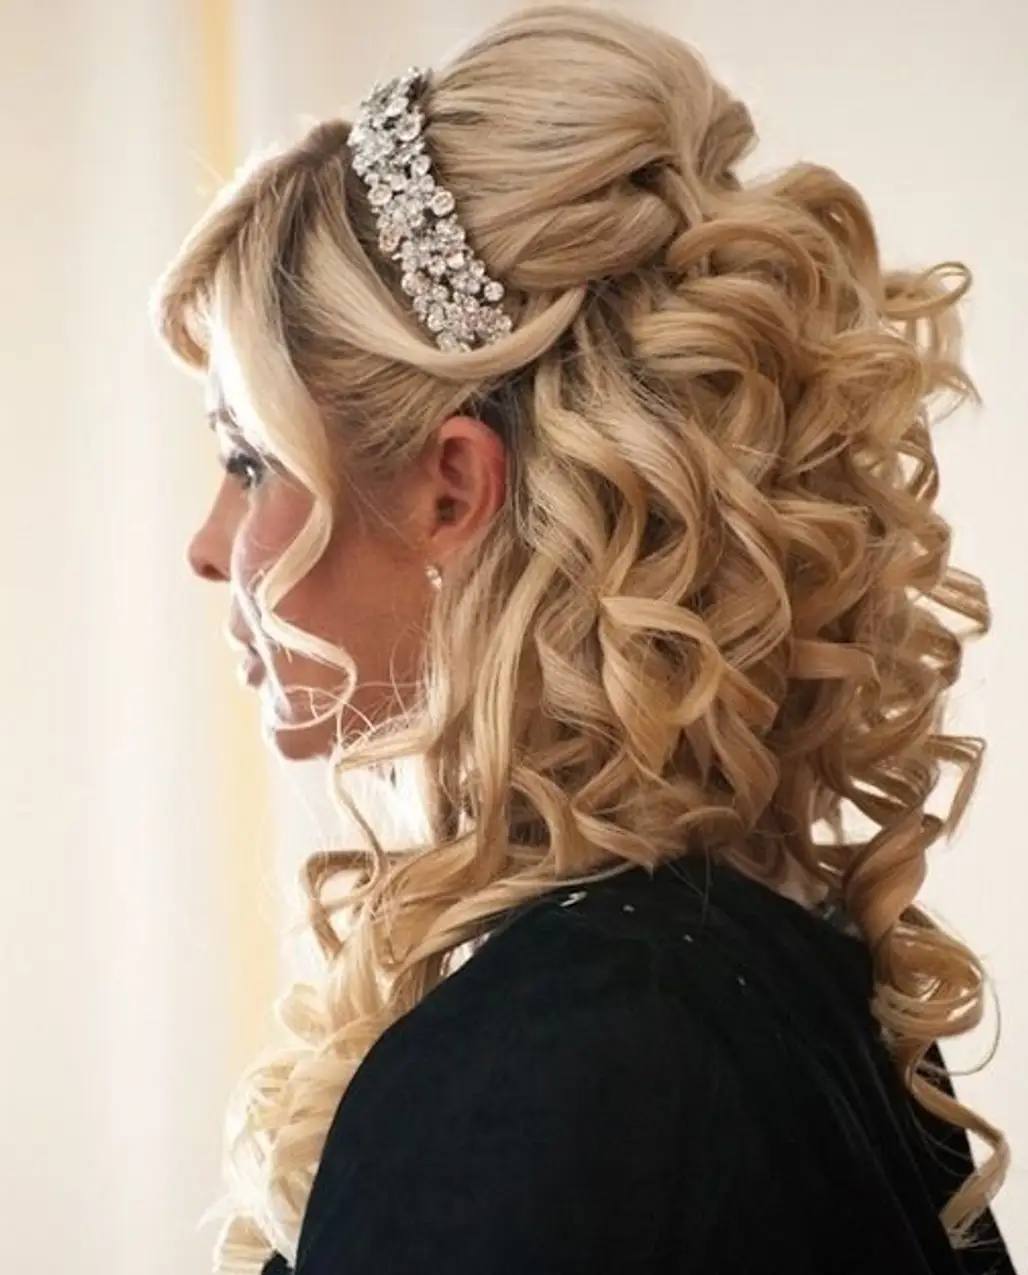 hair,clothing,bridal accessory,hairstyle,fashion accessory,